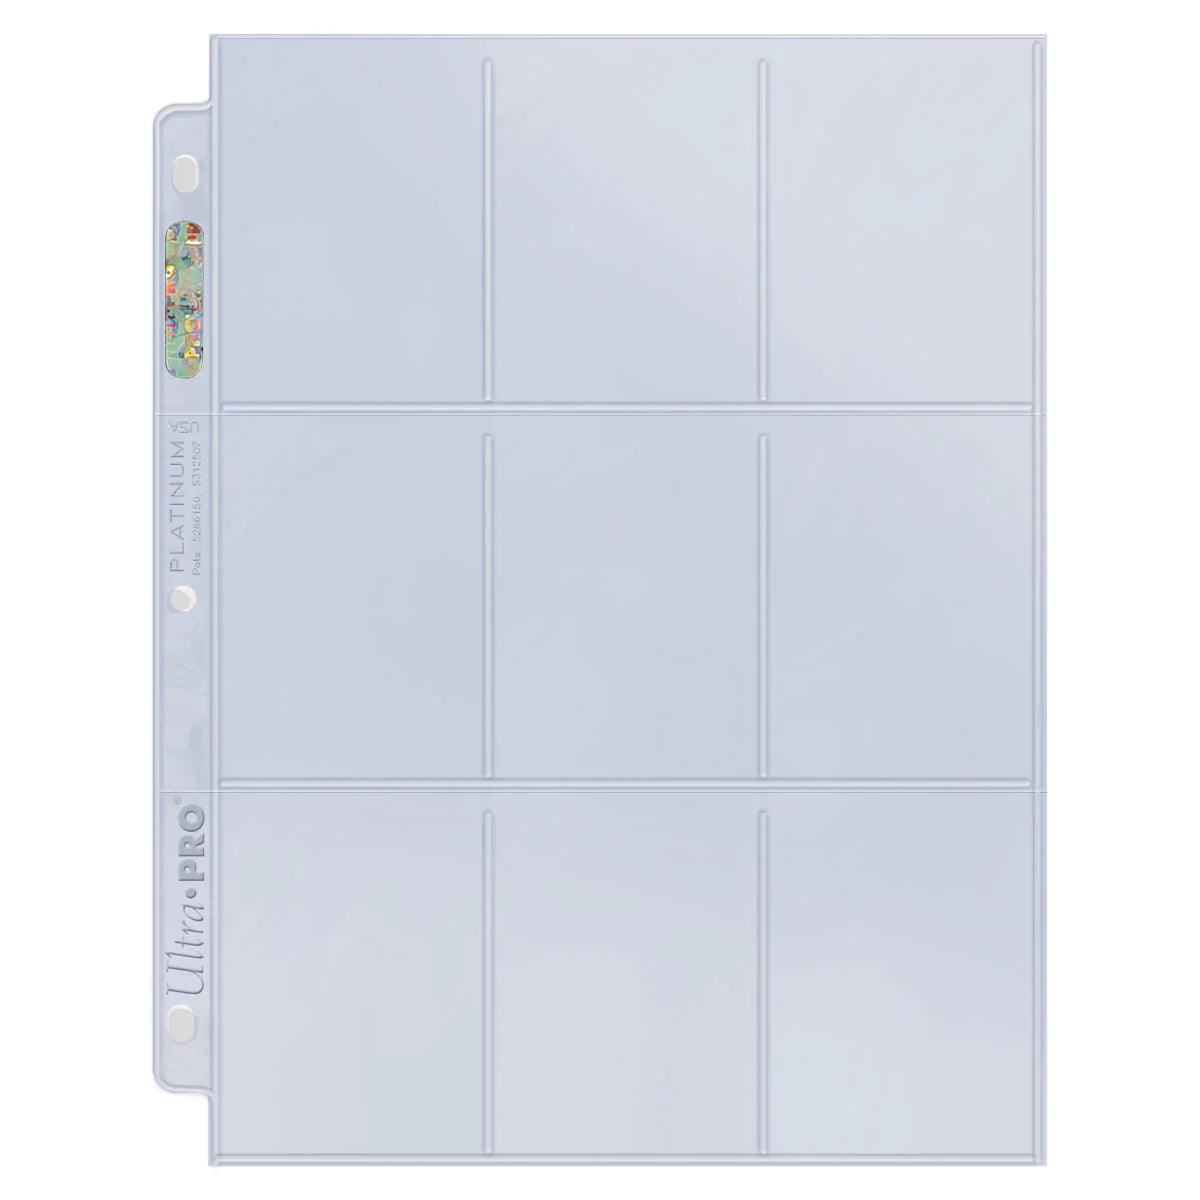 Ultra PRO - 9 Pocket Pages (25ct) for Standard Size Cards - Platinum Series - Hobby Champion Inc